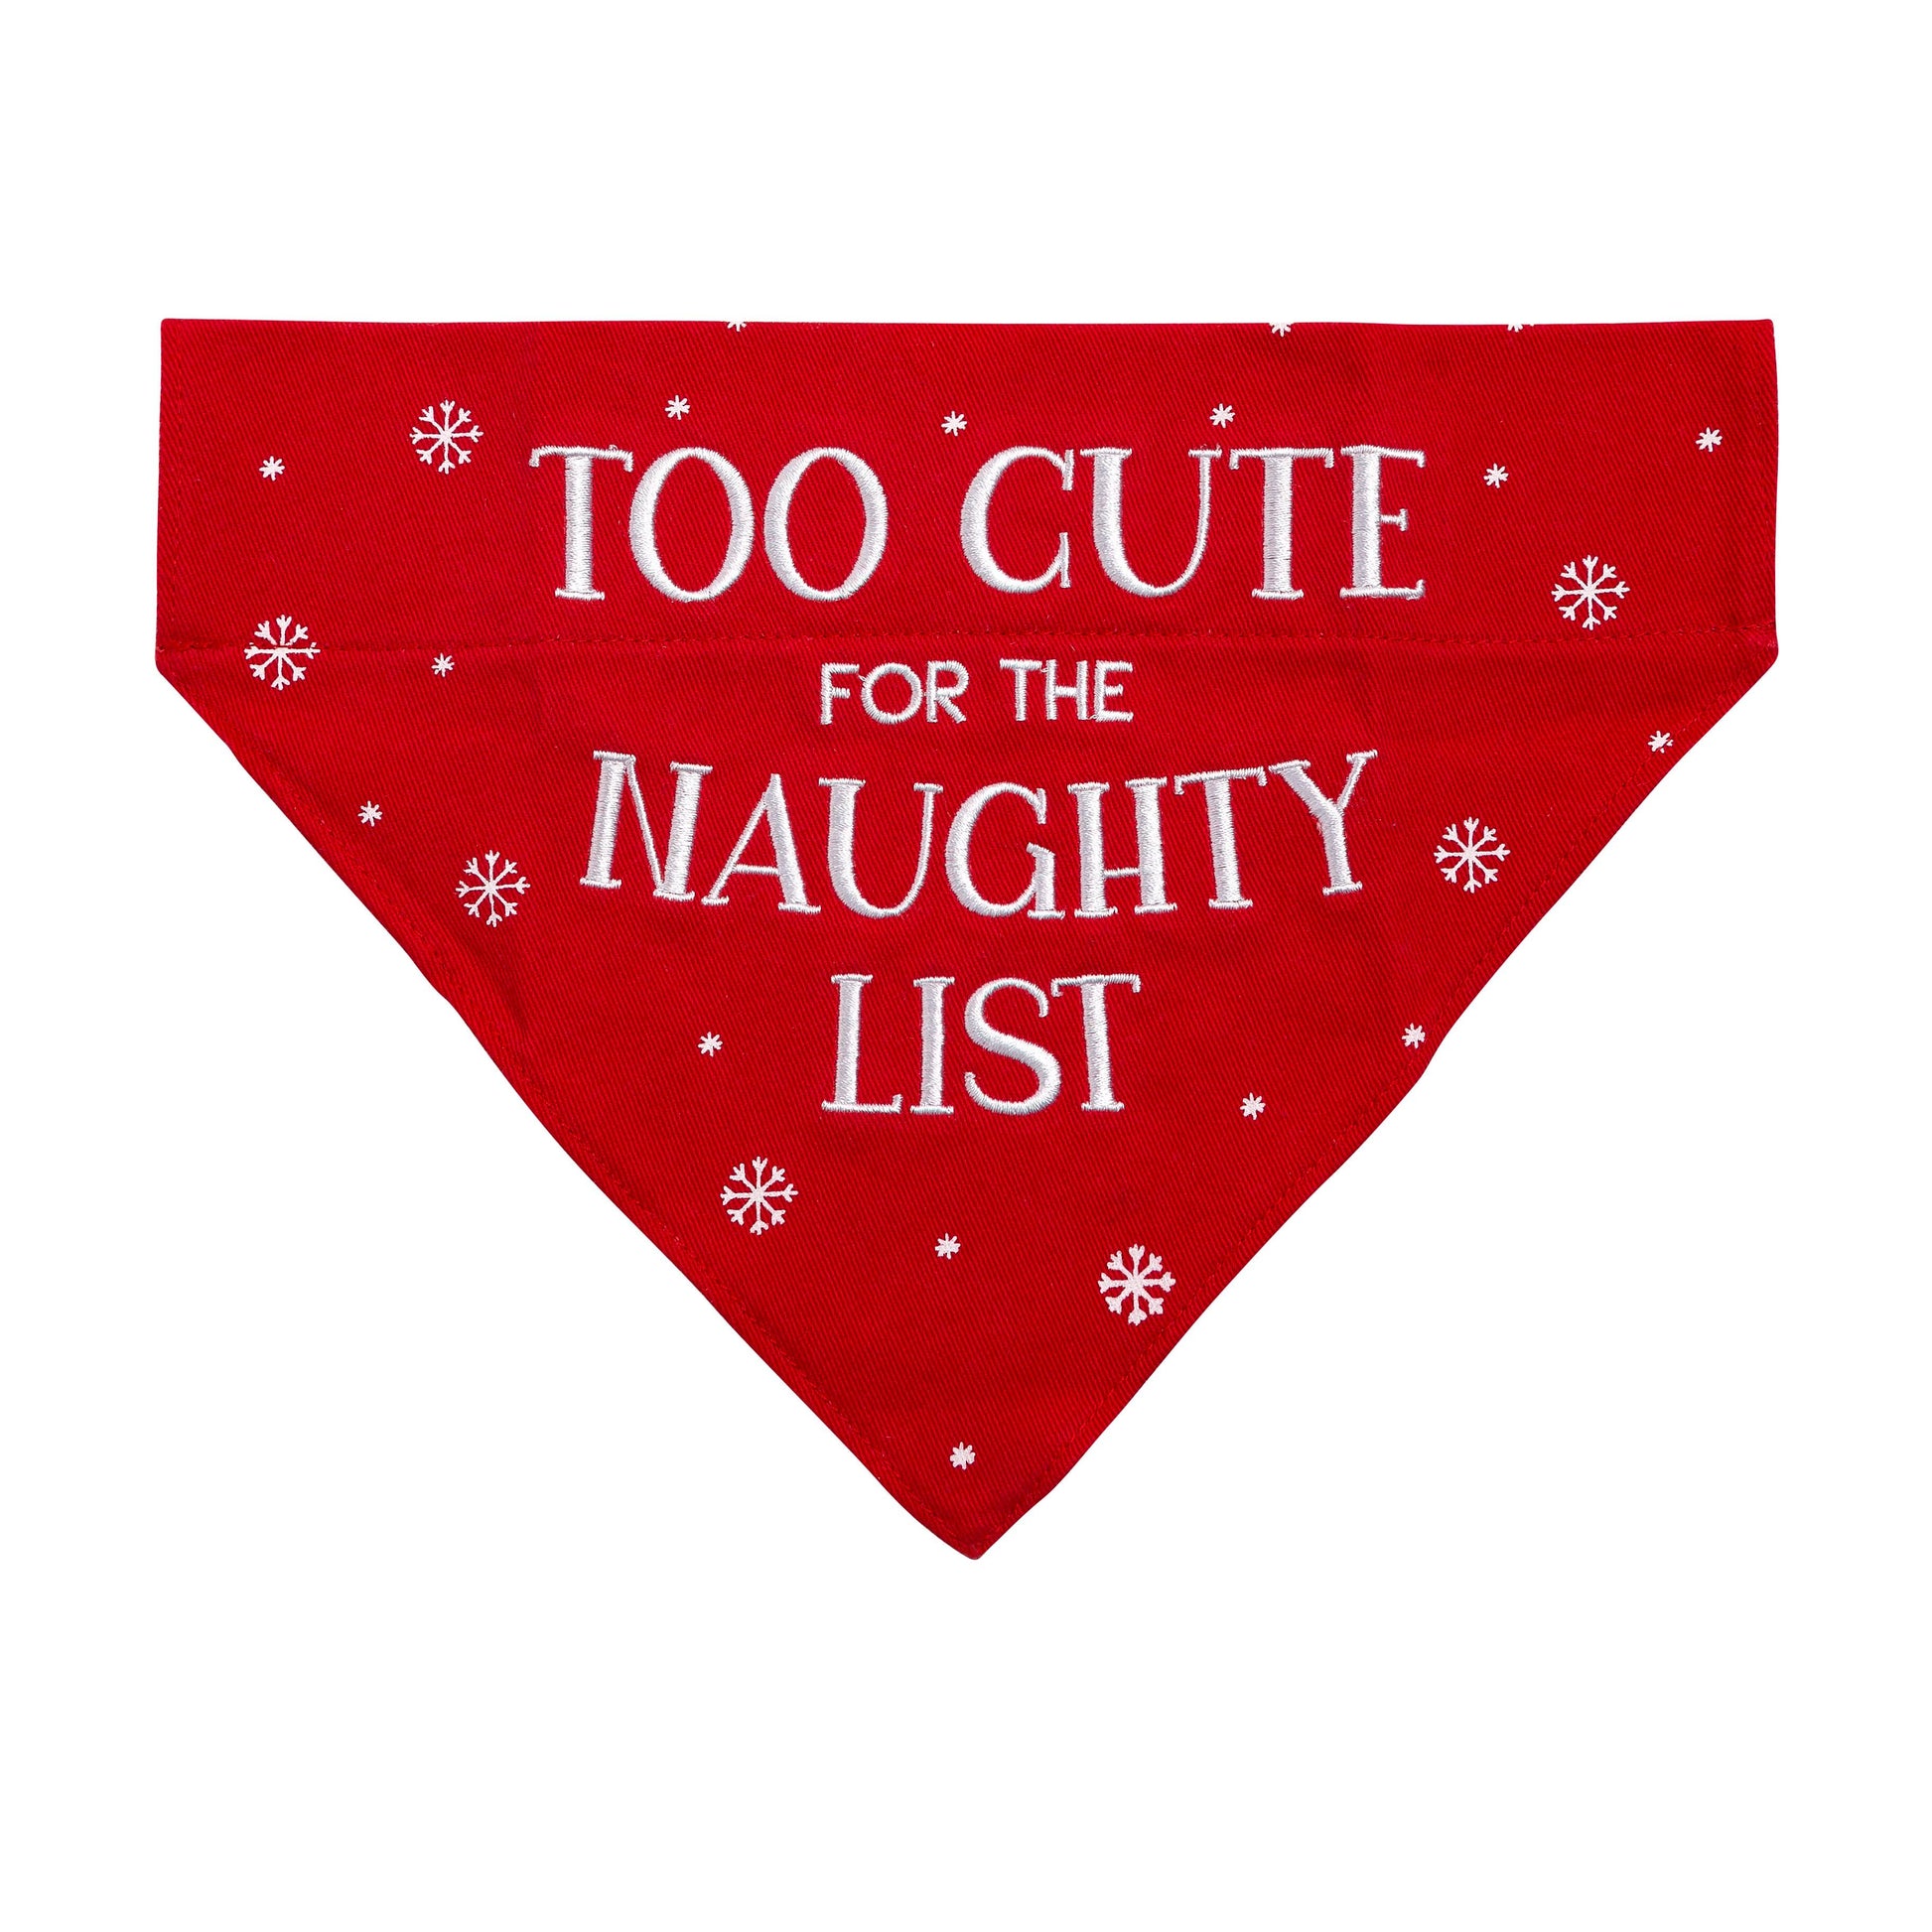 Close up of red bandana with white snowflakes and embroidered in white text "TOO CUTE FOR THE NAUGHTY LIST"